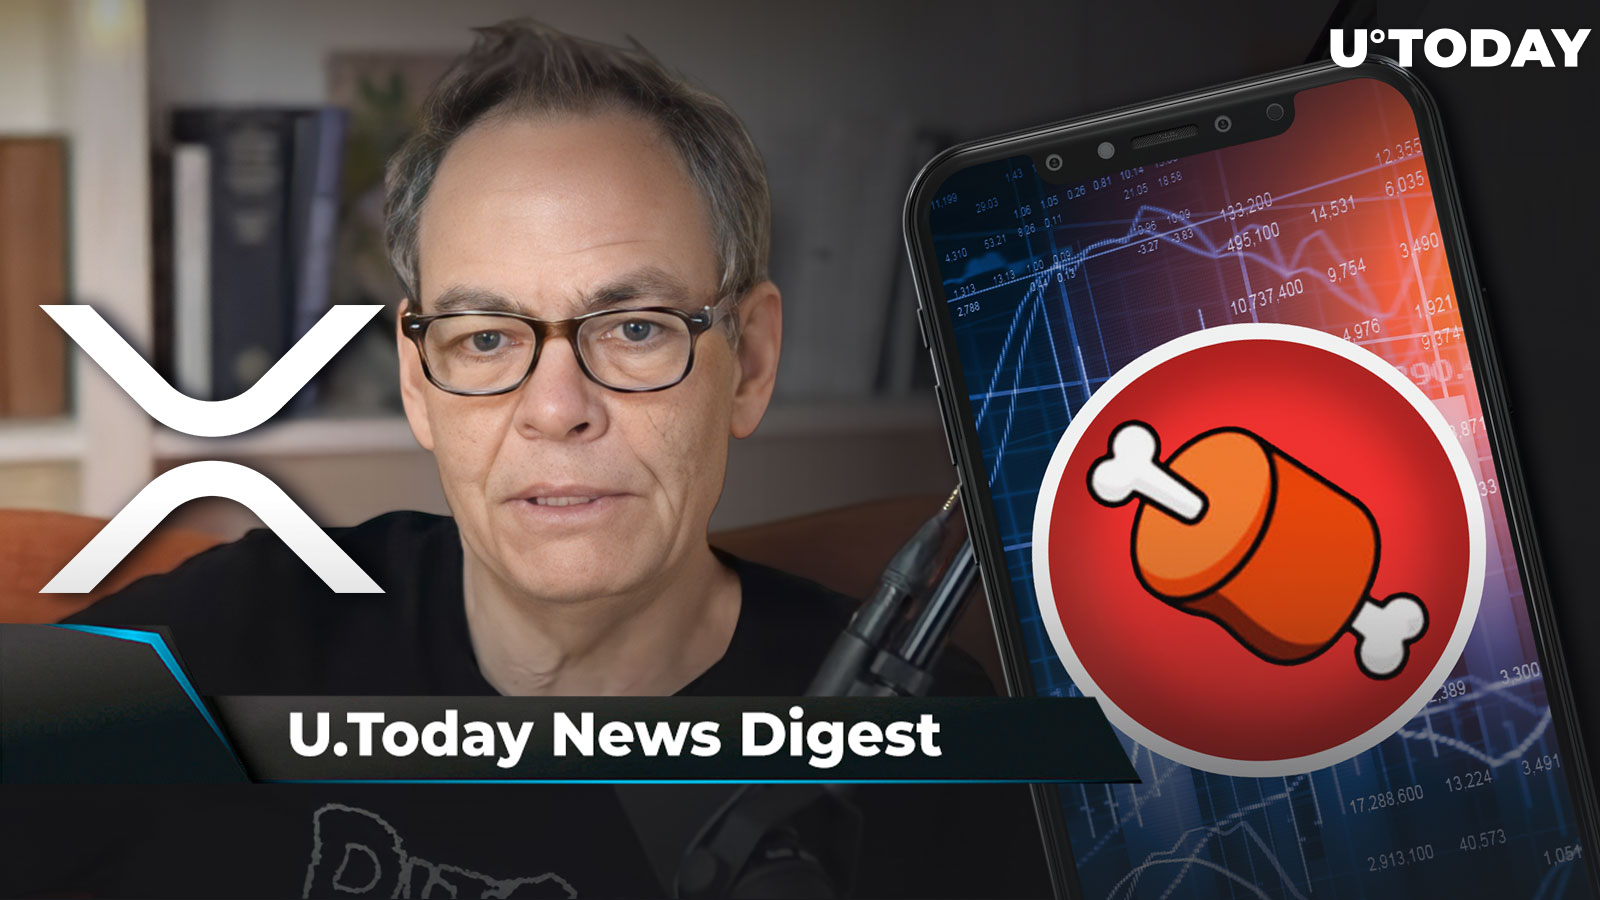 Max Keiser Reveals Whether He Holds XRP, BONE Surges 8%, Michael Saylor Pitches Bitcoin to Ray Dalio: Crypto News Digest by U.Today